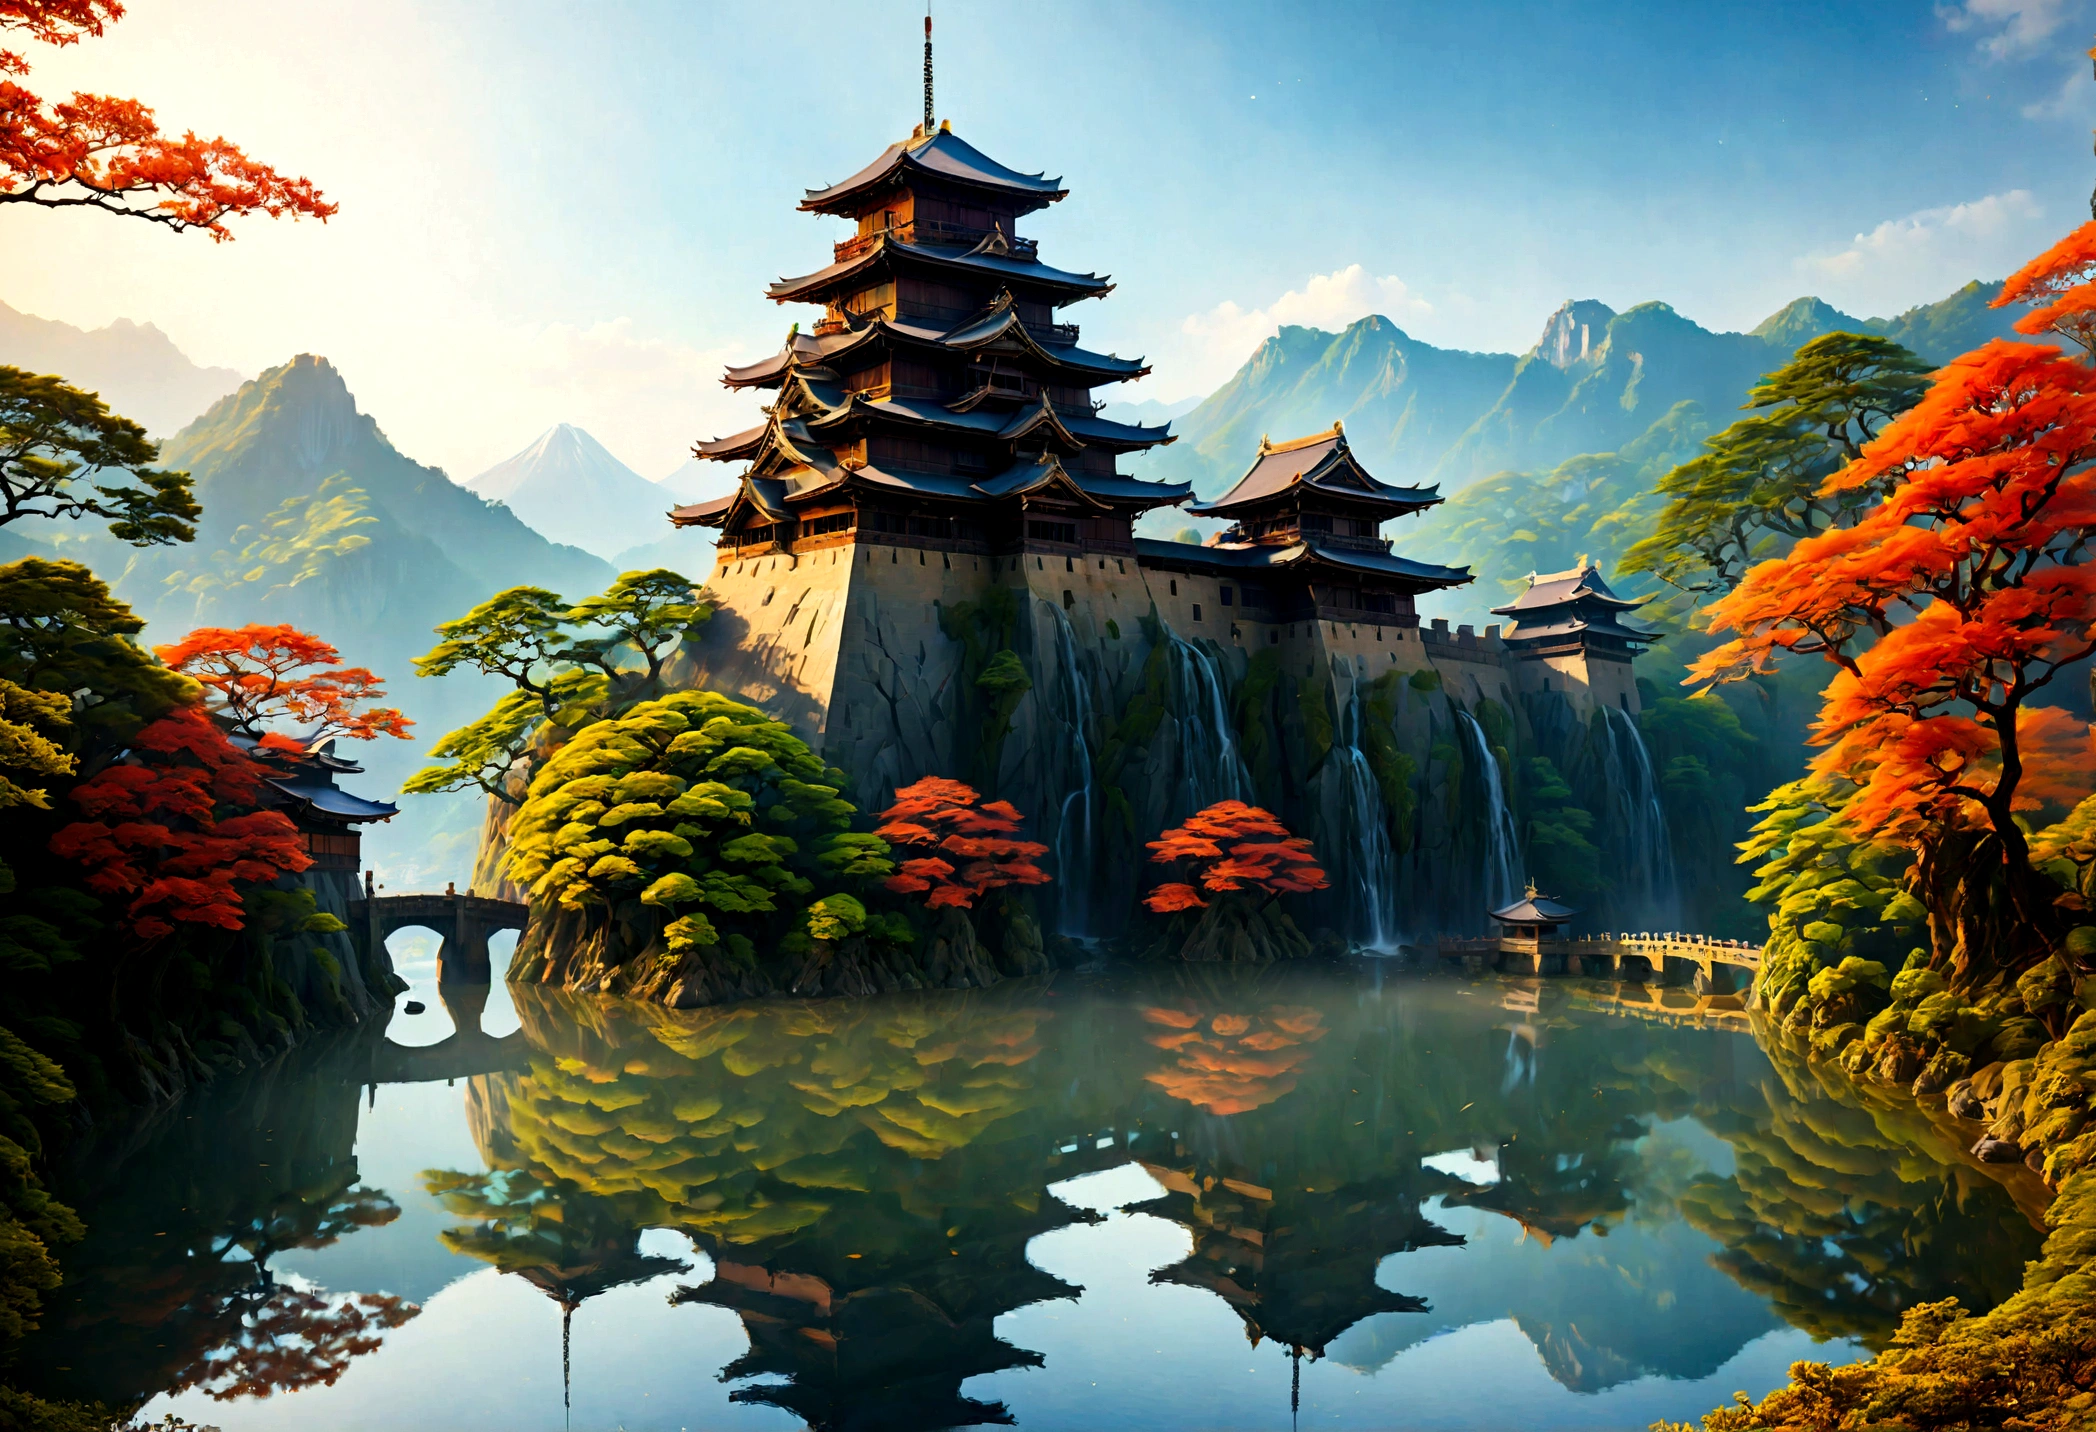 an award winning picture, National Geographic style, Arafed, magnificent artistic picture of a (Japanese medieval castle: 1.4) (masterpiece, best detailed: 1.4)on a mountain range near a lake at dusk, fantasy art D&D art, castle, with towers, turrets, barbican, it is dusk time, the sun is going down, and there are stars in the skies, the last rays of sun, there is a ((bridge lit by torches: 1.4)) crossing to the other side, the castle is being reflected in the water, mist rising from the water, fantasy forest background, ultra best realistic, best details, 16k, [ultra detailed], masterpiece, best quality, (extremely detailed), photorealism, depth of field, hyper realistic painting, digital art